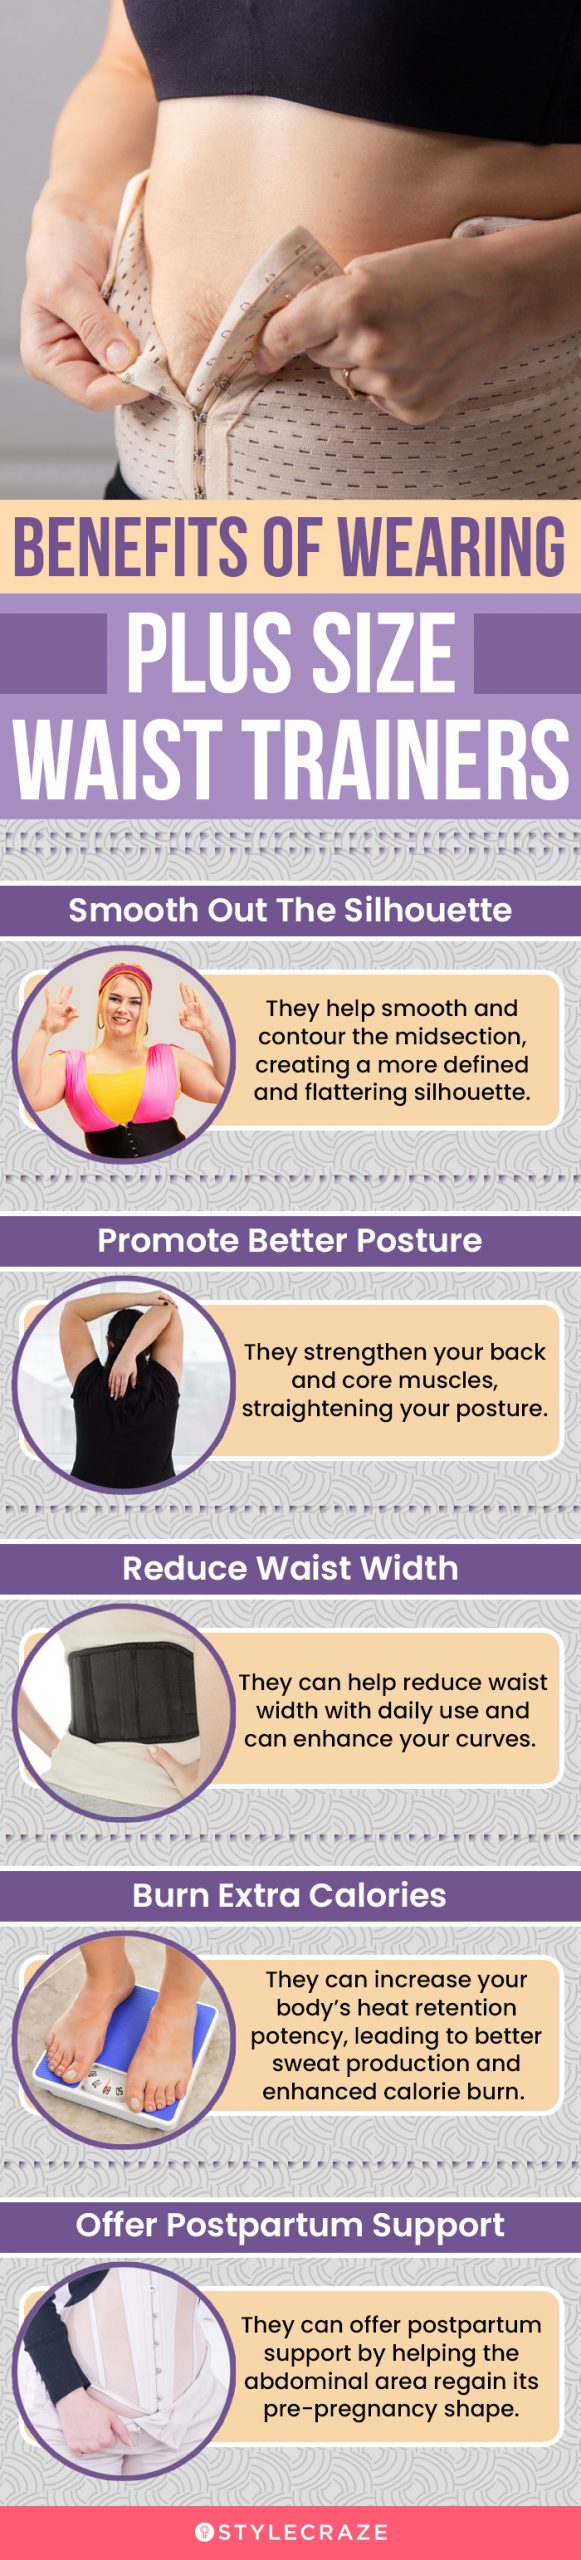 Benefits Of Wearing Plus Size Waist Trainers (infographic)